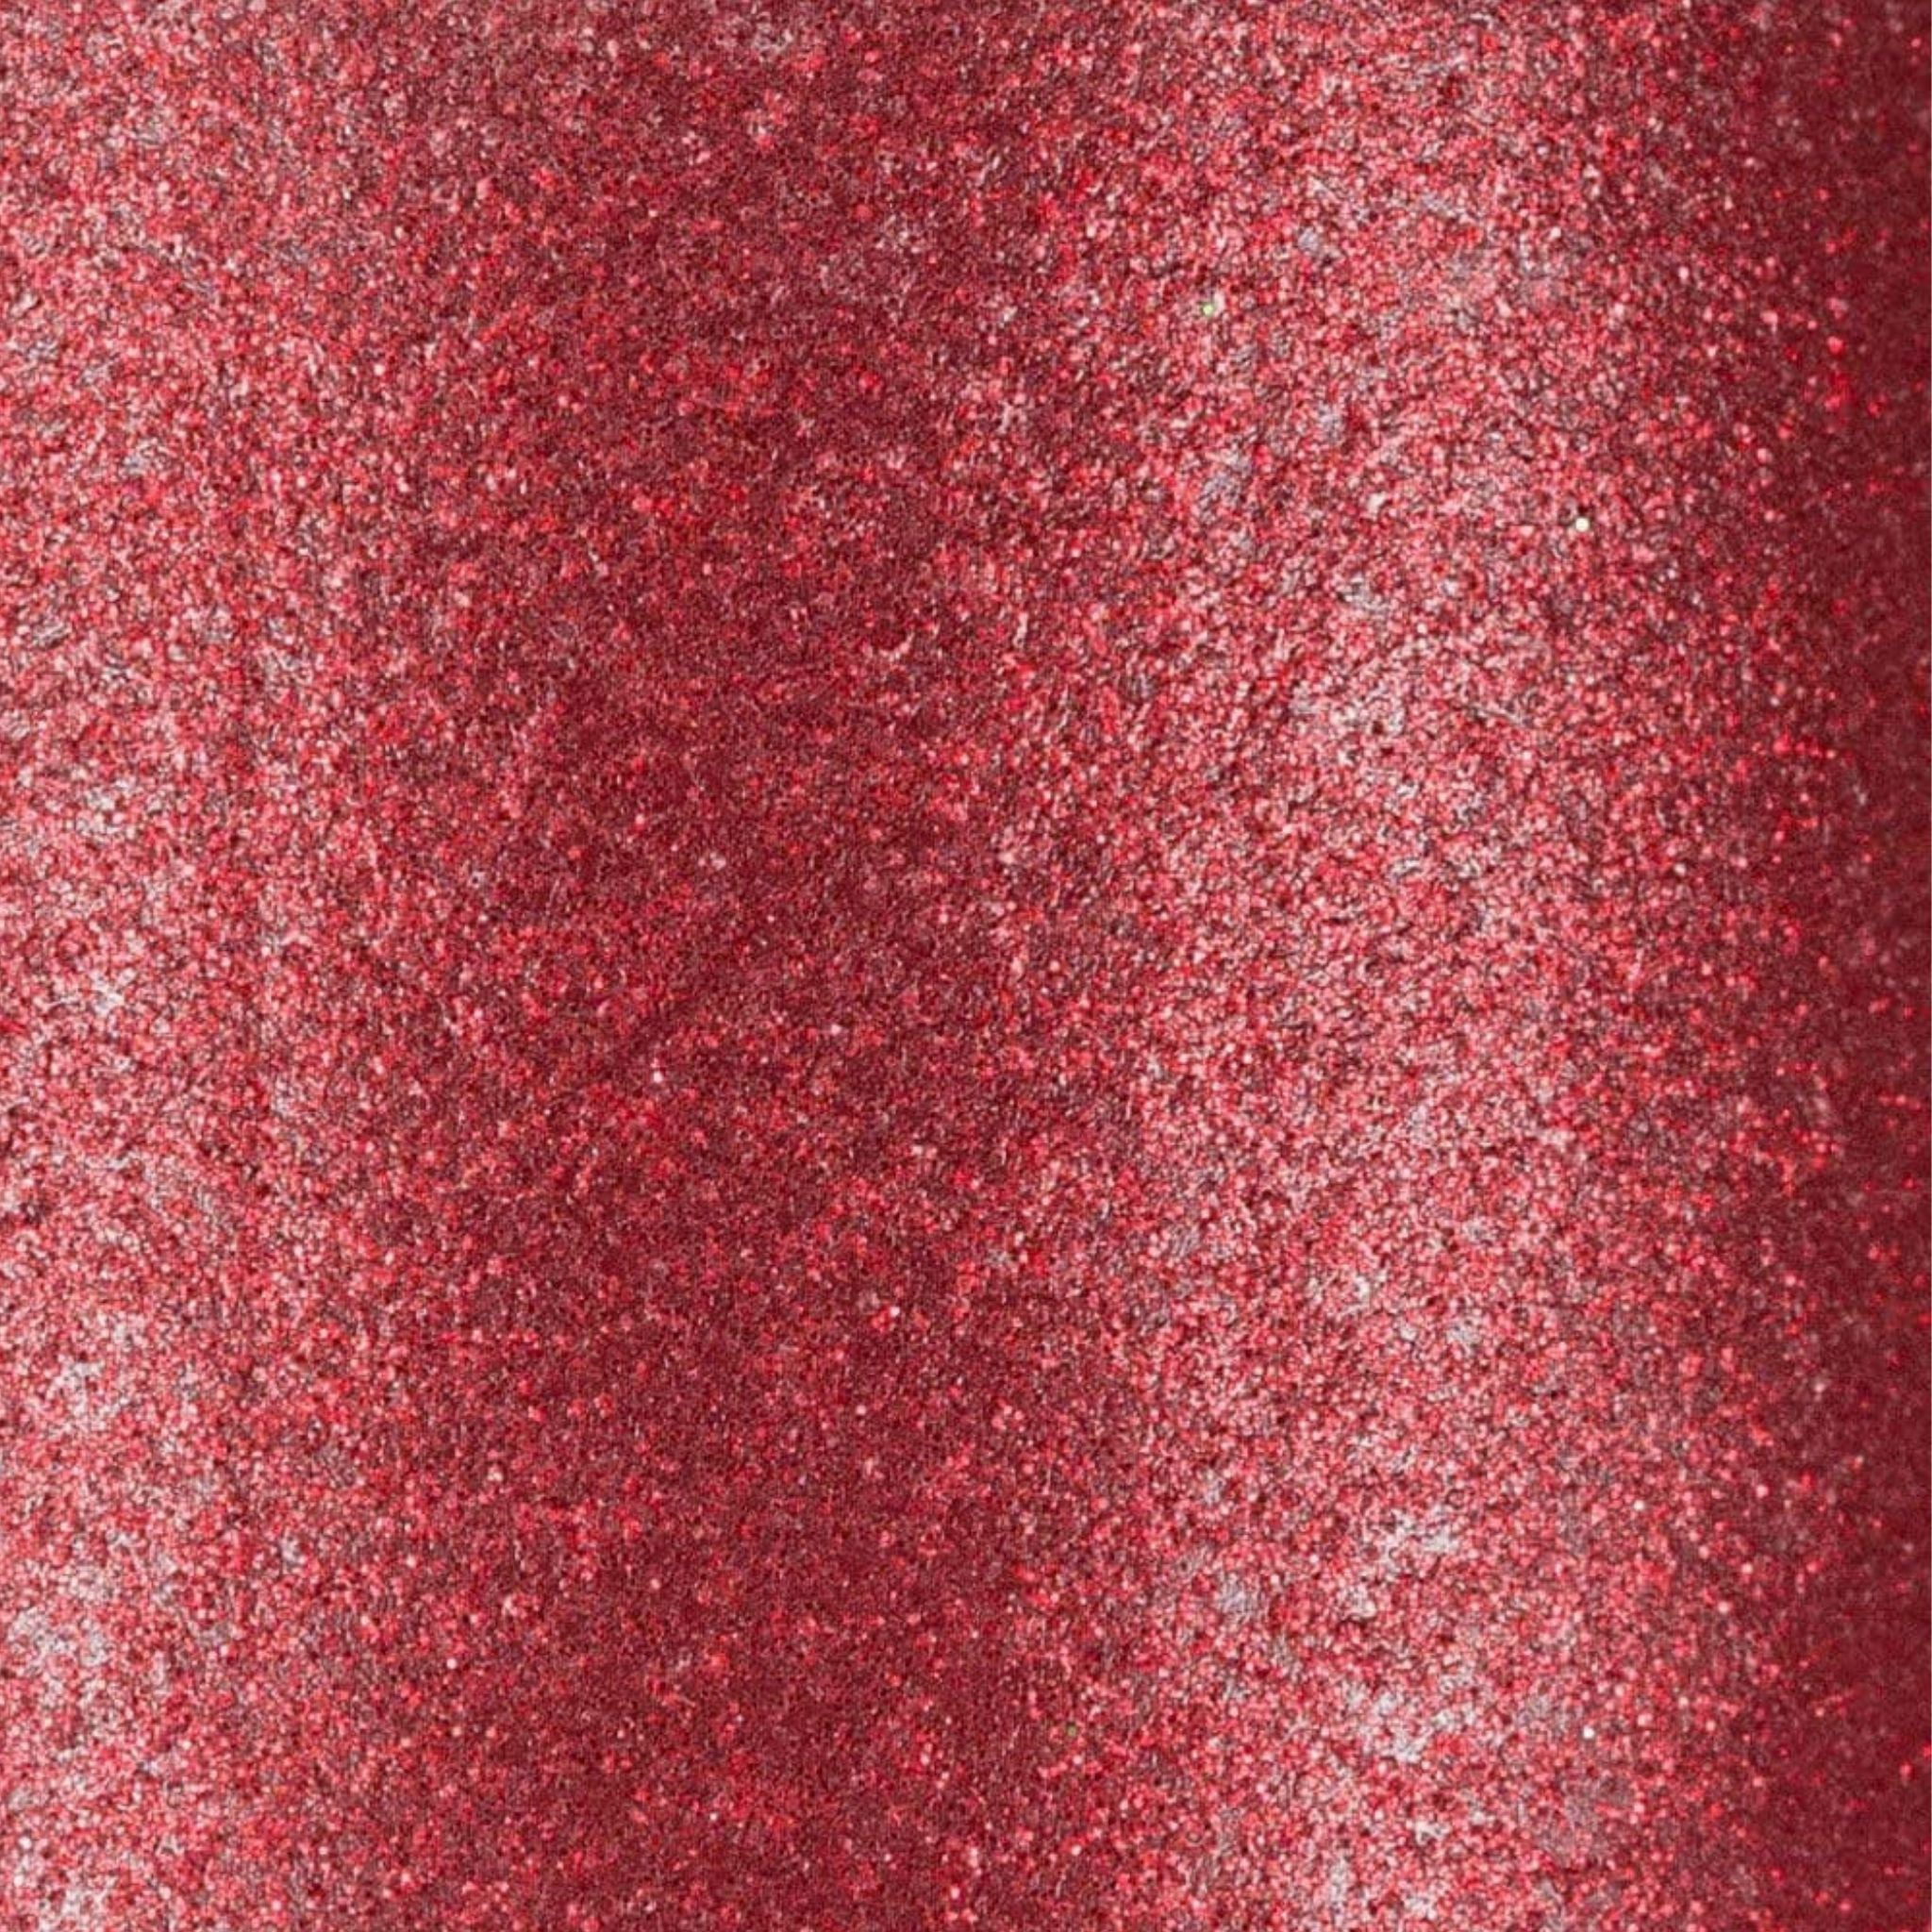 Rust-Oleum 268045 Specialty Glitter Spray, 10.25 Ounce (Pack of 1), Red -  Spray Paints 